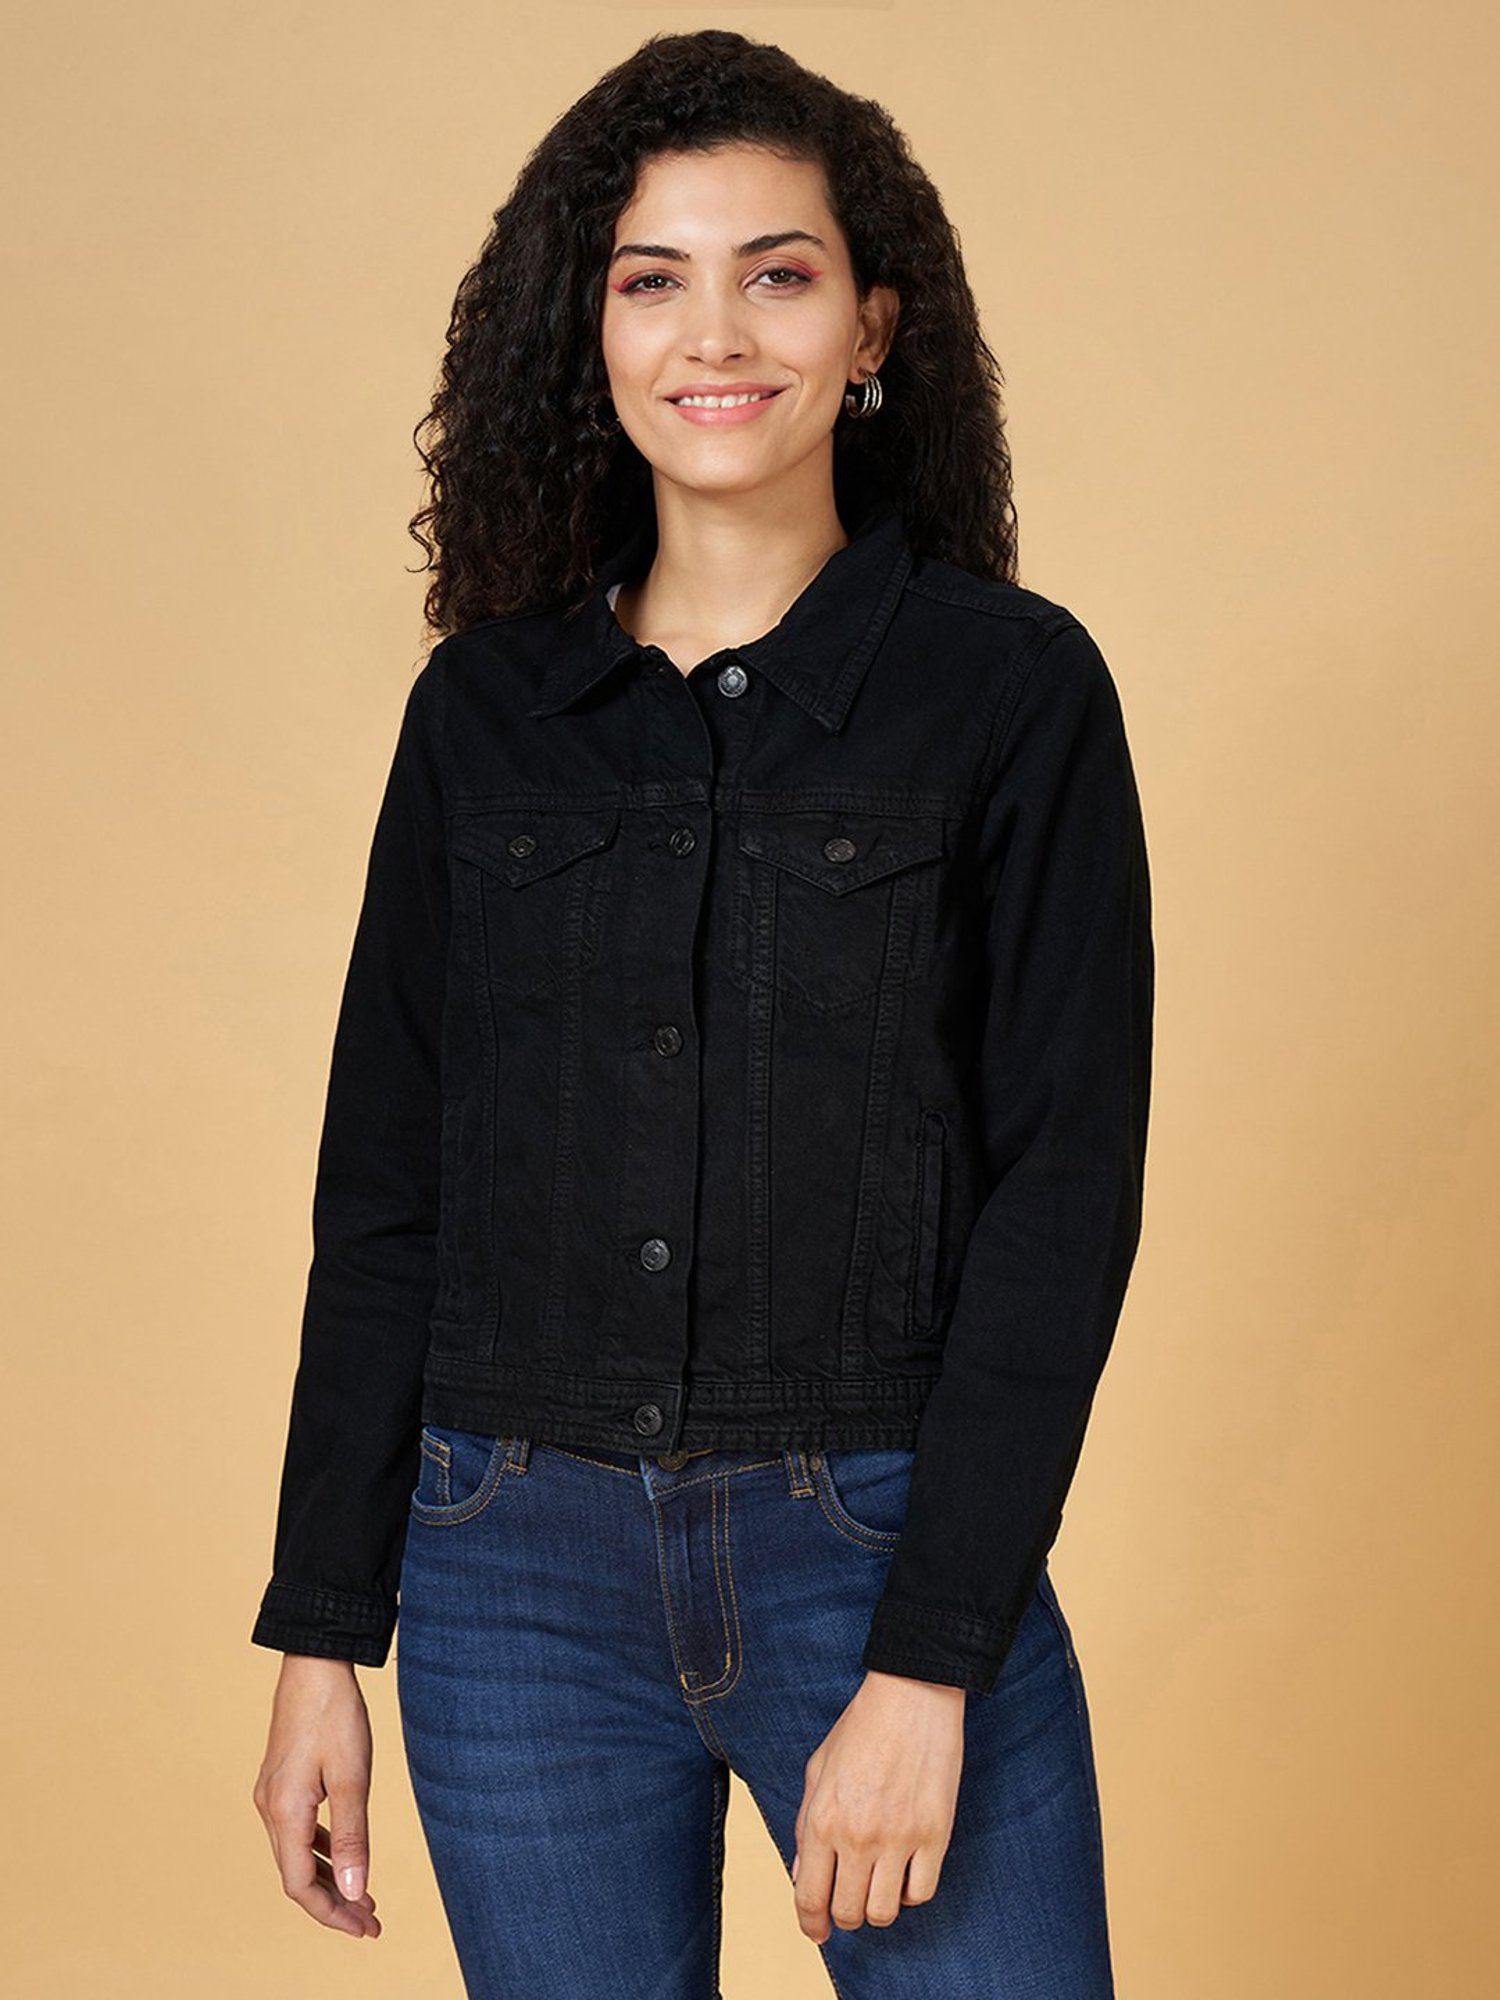 Black Solid Casual Full Sleeves Collared Neck Women Comfort Fit Jacket  Selling Fast at Pantaloons.com